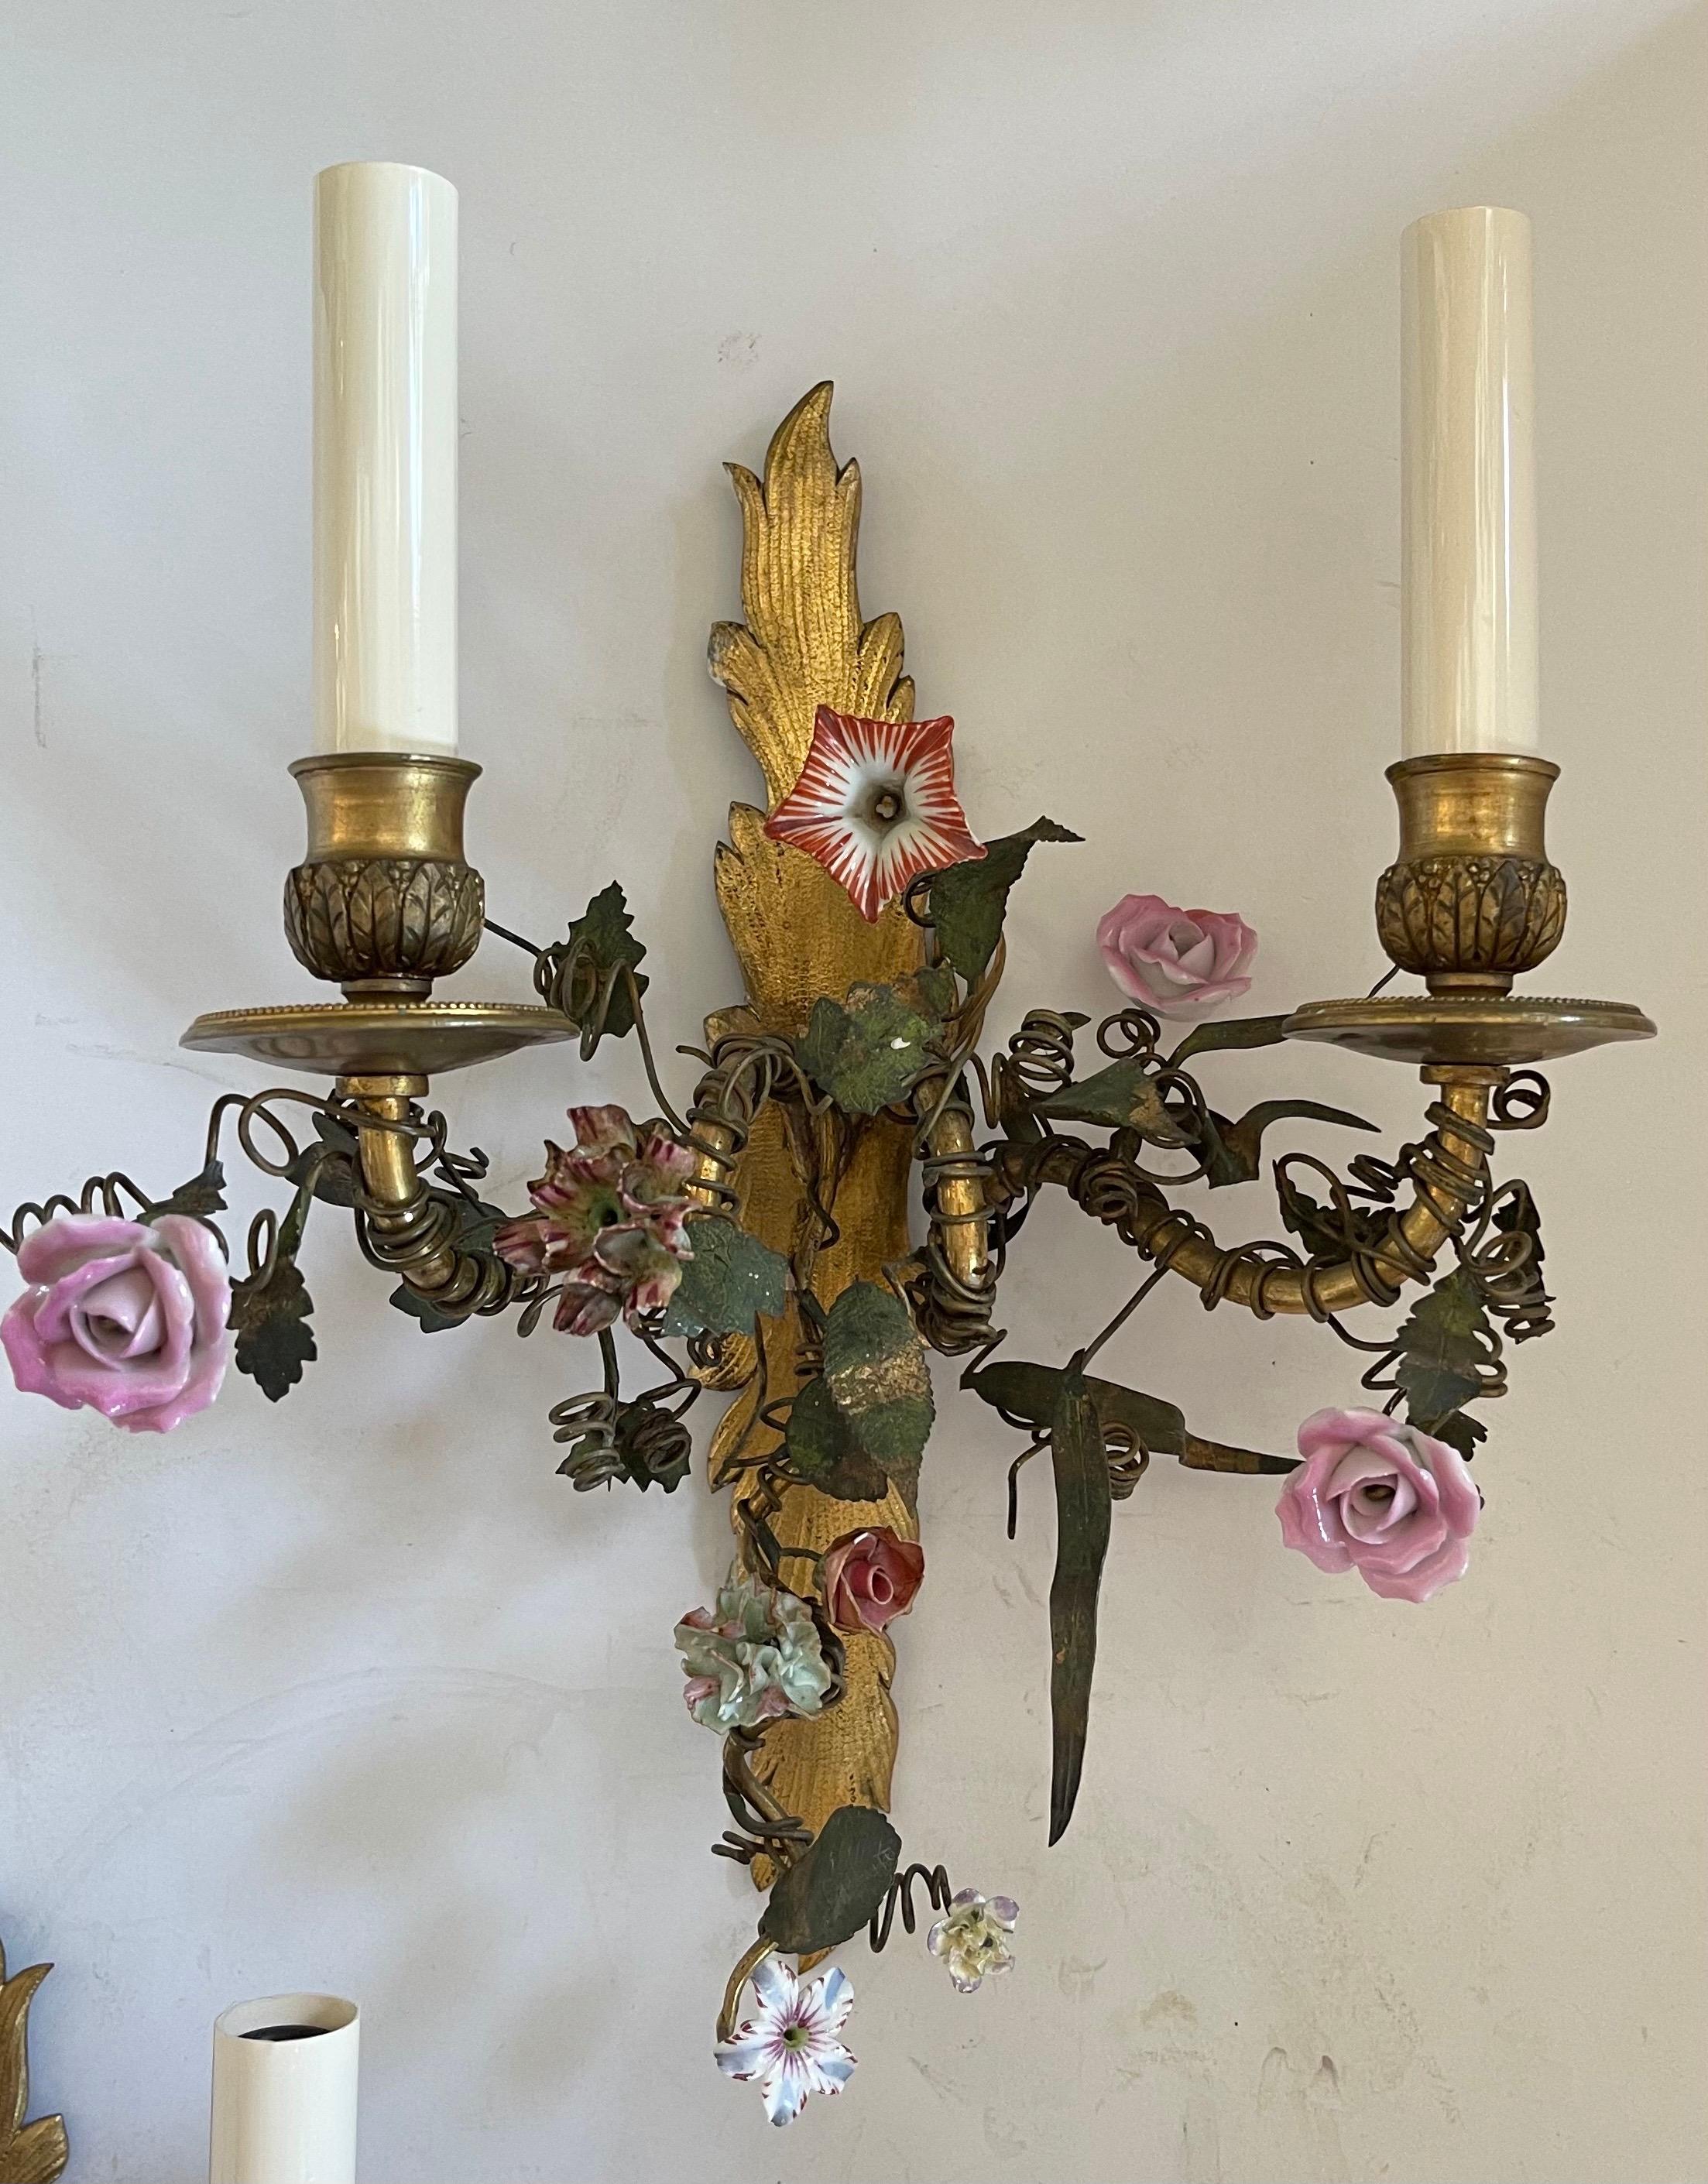 A wonderful pair of french vintage bronze two-arm candelabra sconces rewired with porcelain flowers through out.